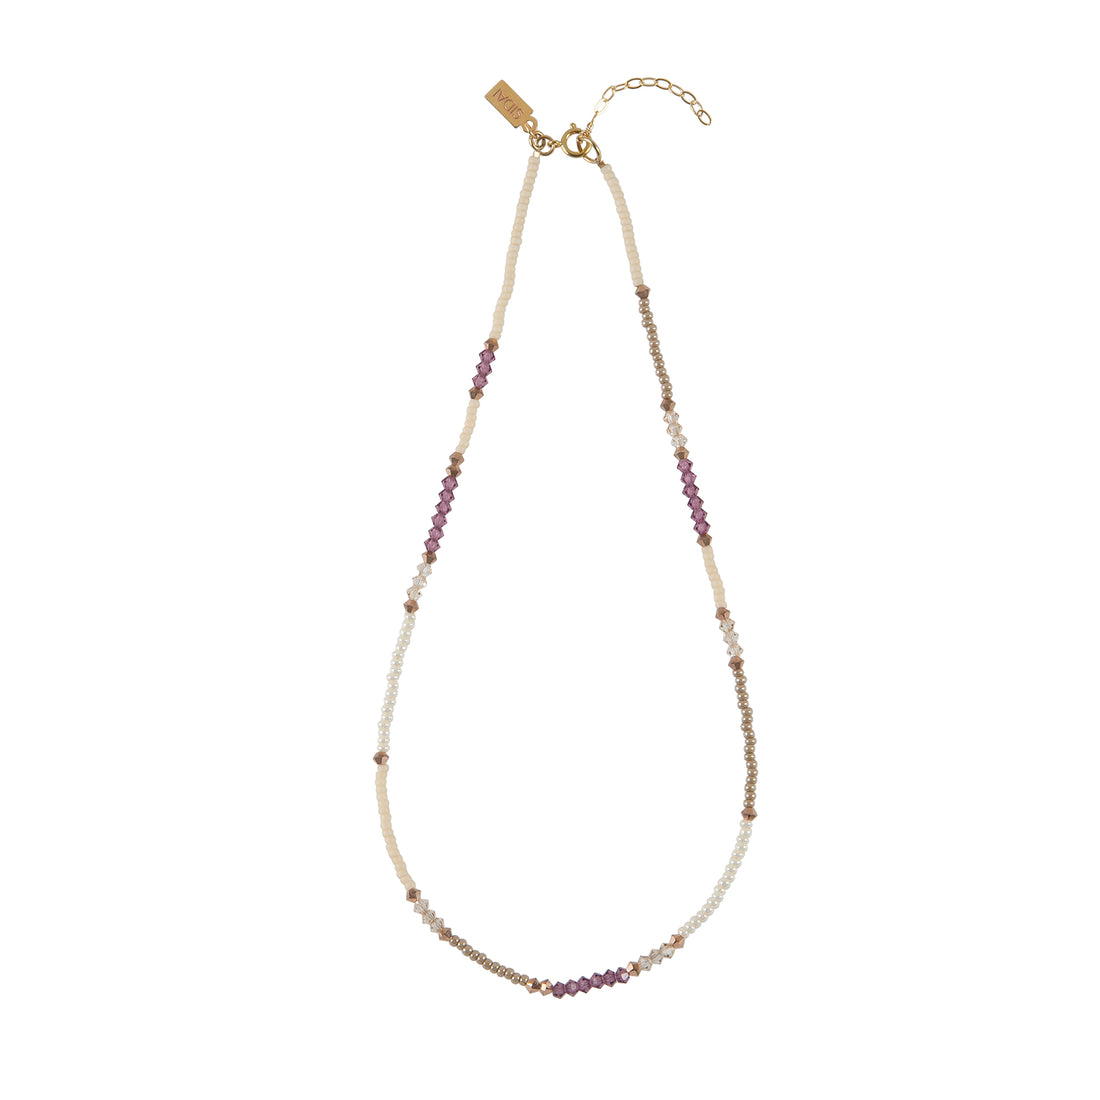 Utulivu Assorted Beaded Necklace - PINK/PEARL/AMETHYST/HONEY